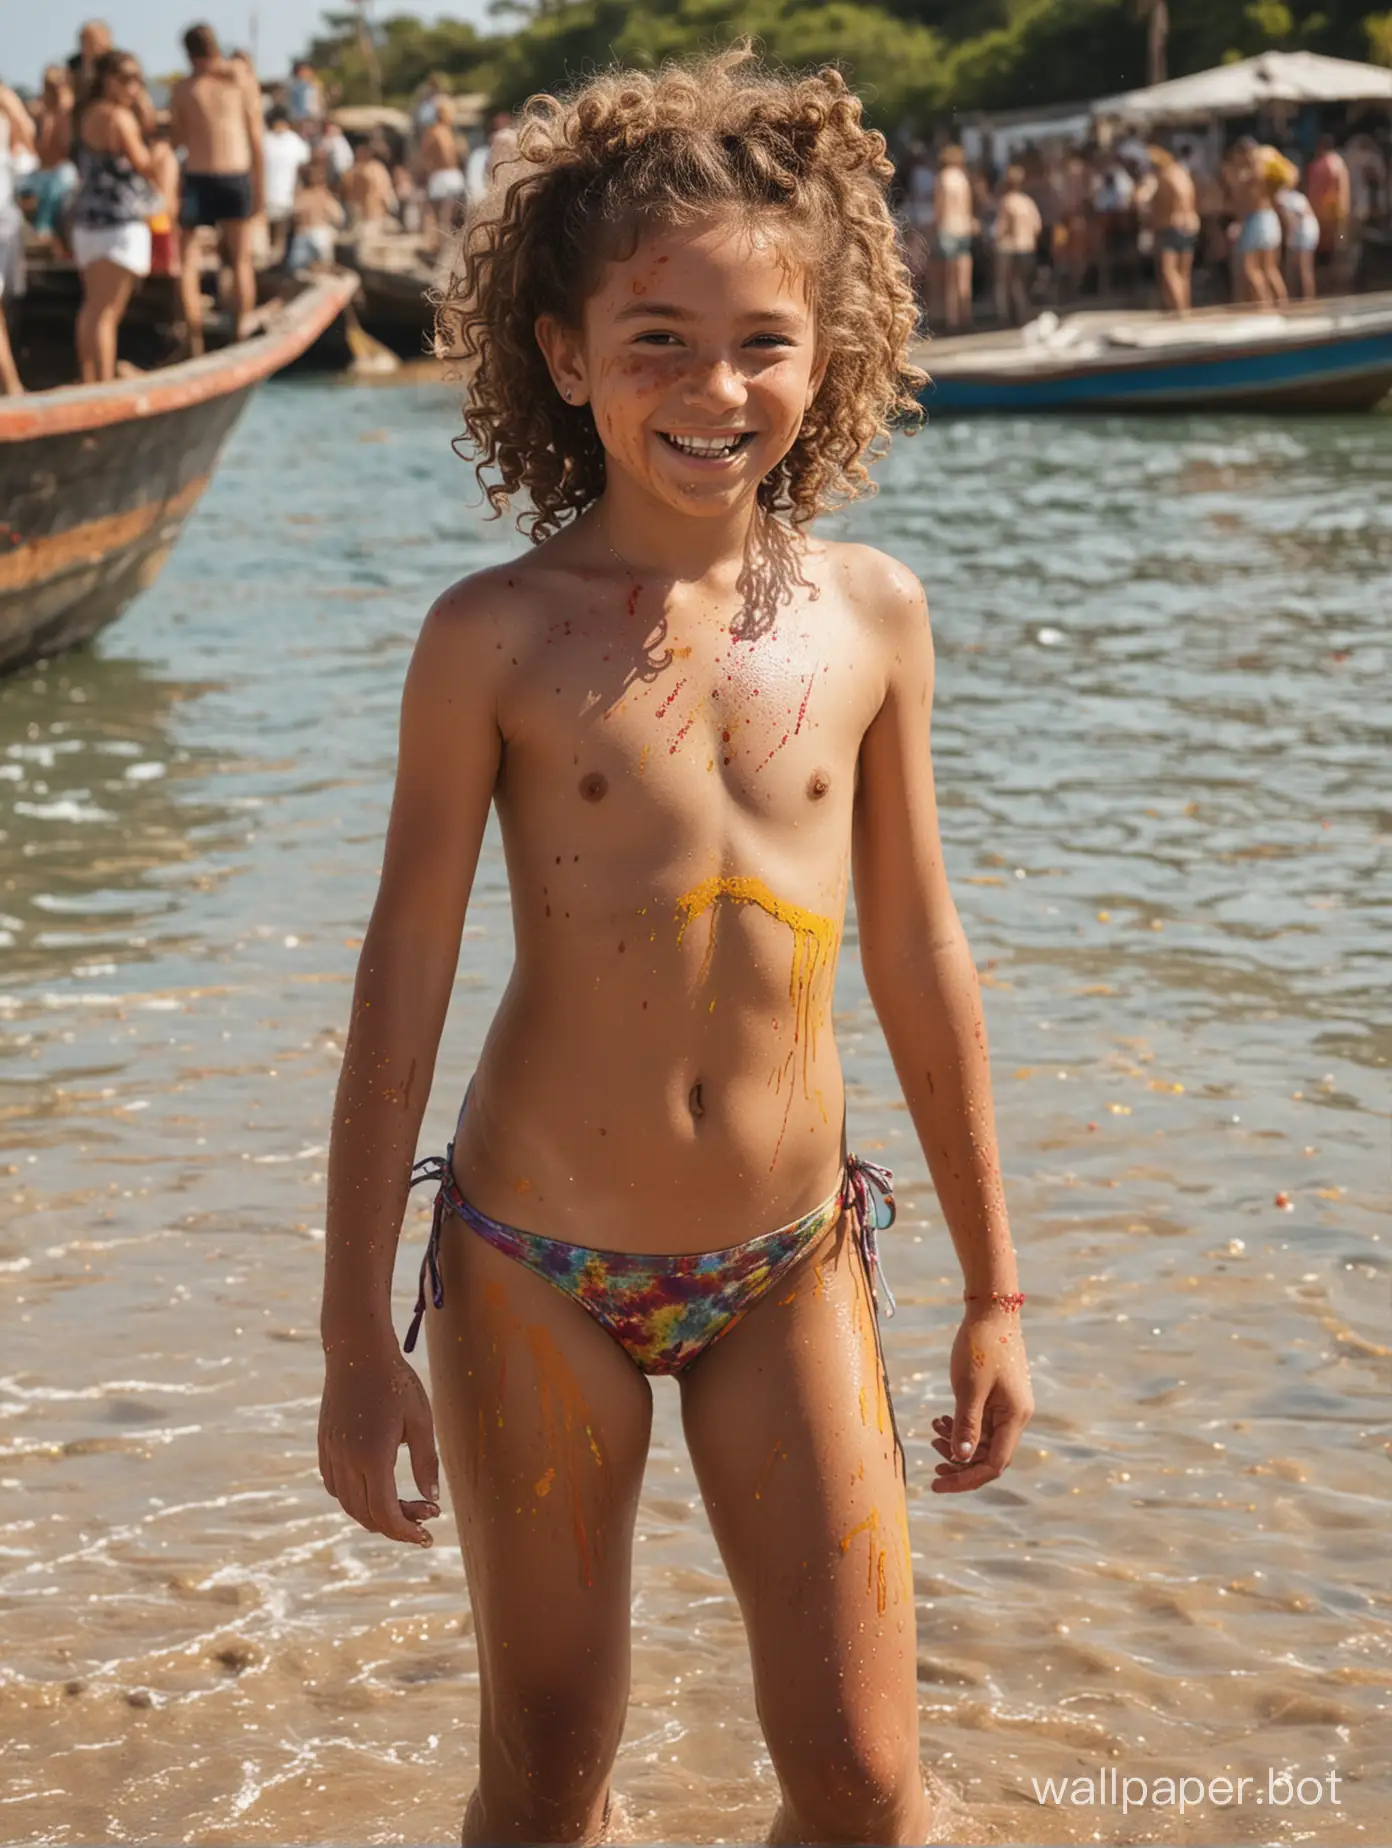 11-year-old girl with curls by the sea in a bikini topless, paint on body, holi celebration, full-length, dynamic poses, boat with passengers, smile